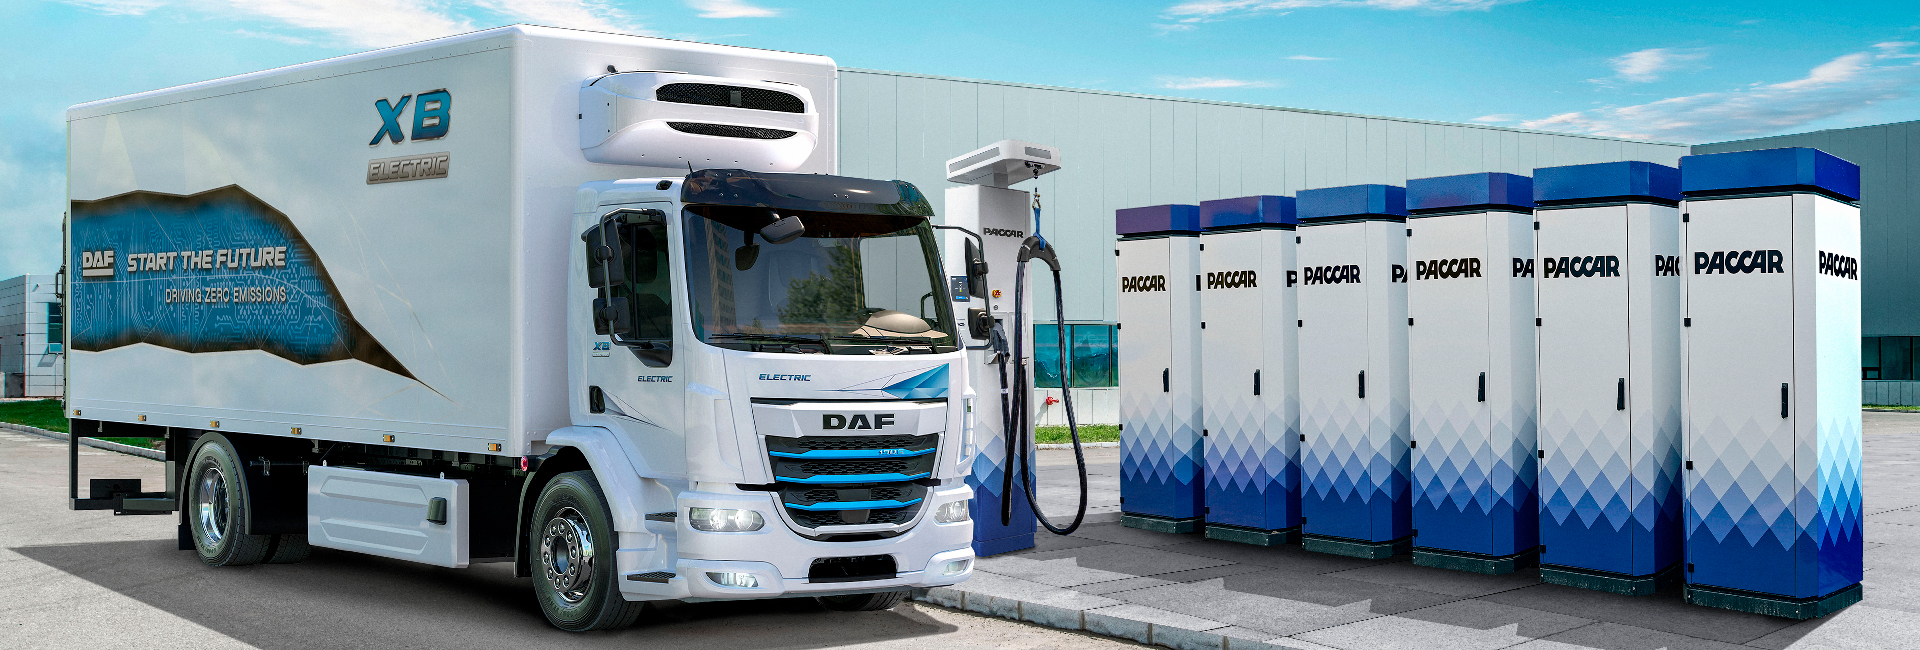 DAF-XB-Electric-truck-and-charger